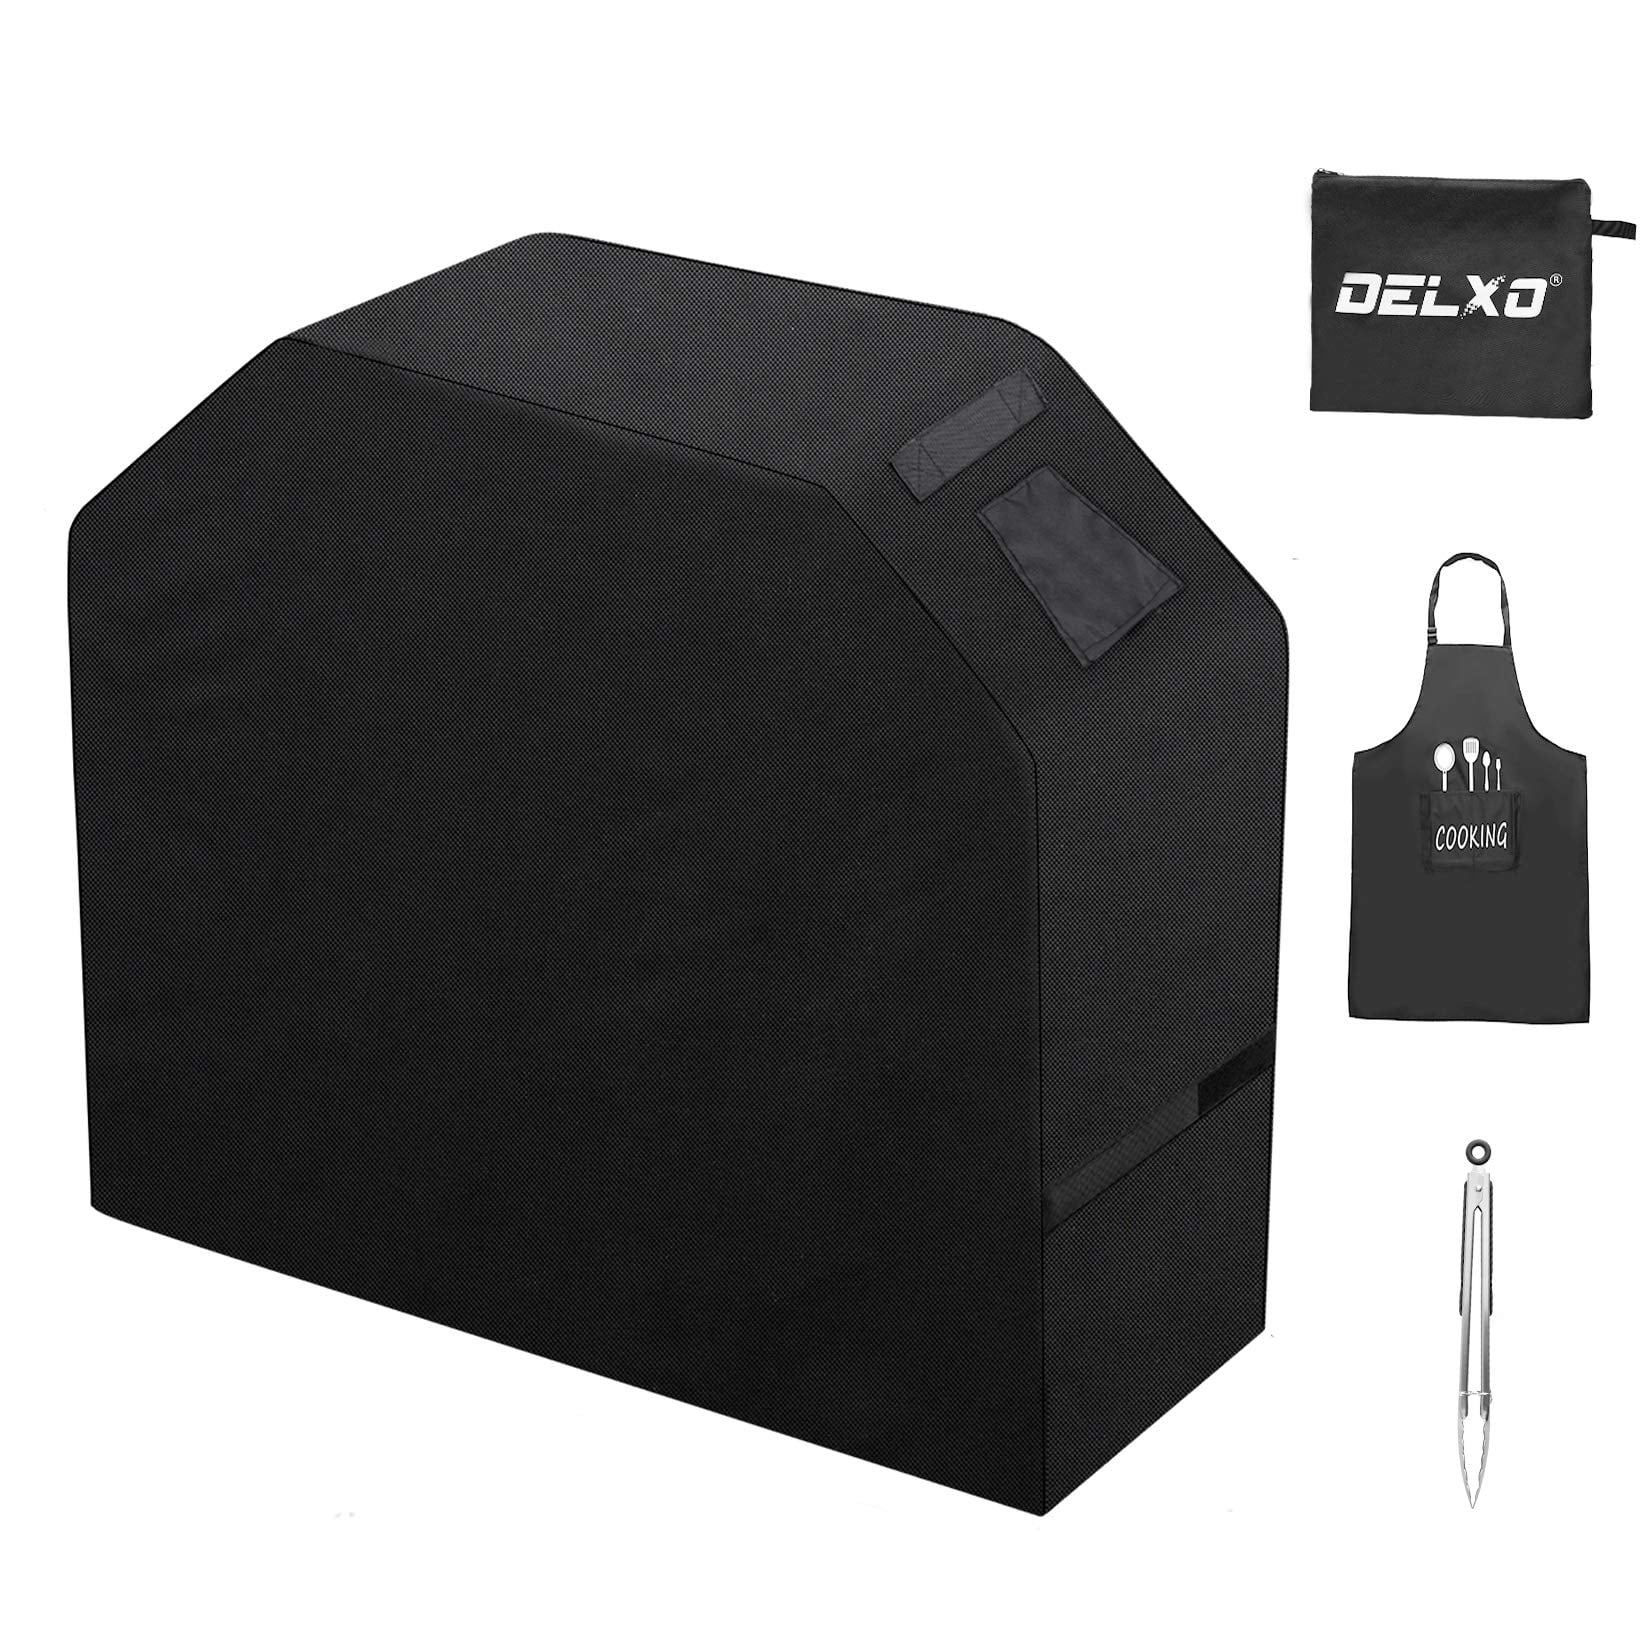 Windproof Rip-Proof Waterproof Barbecue Gas Grill Cover Spirit 300 Series and Spirit 200 Series 52 inch 600D Heavy Duty Cover UV & Weather Resistant DELXO Grill Cover for Weber Spirit II 300 Series 